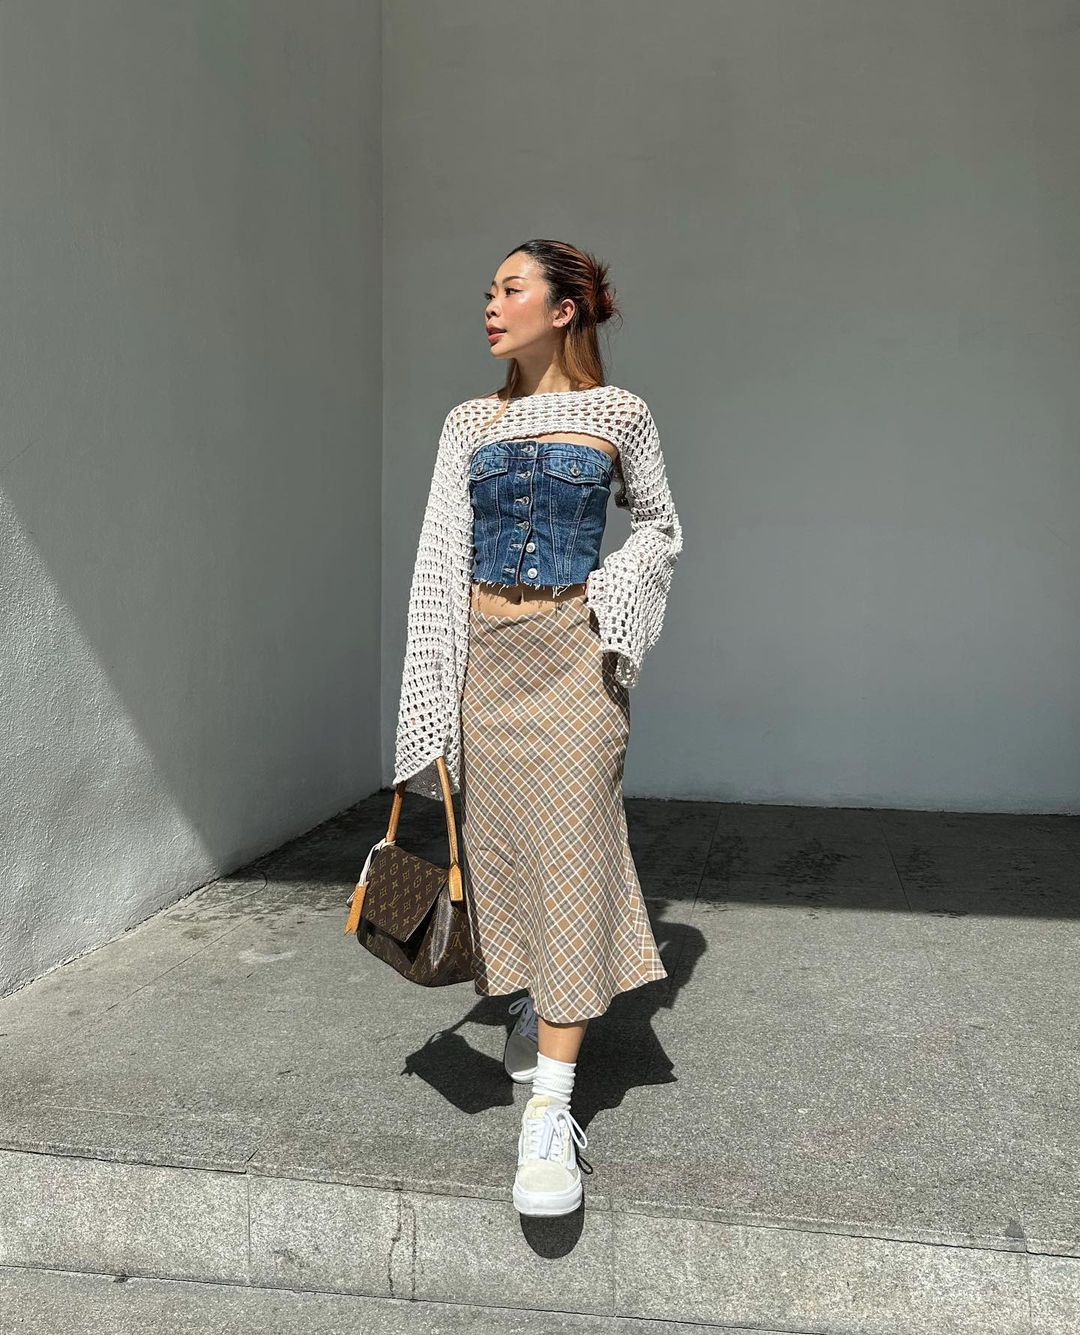 Rhea Bue Ong White sneaker outfit ideas and inspo